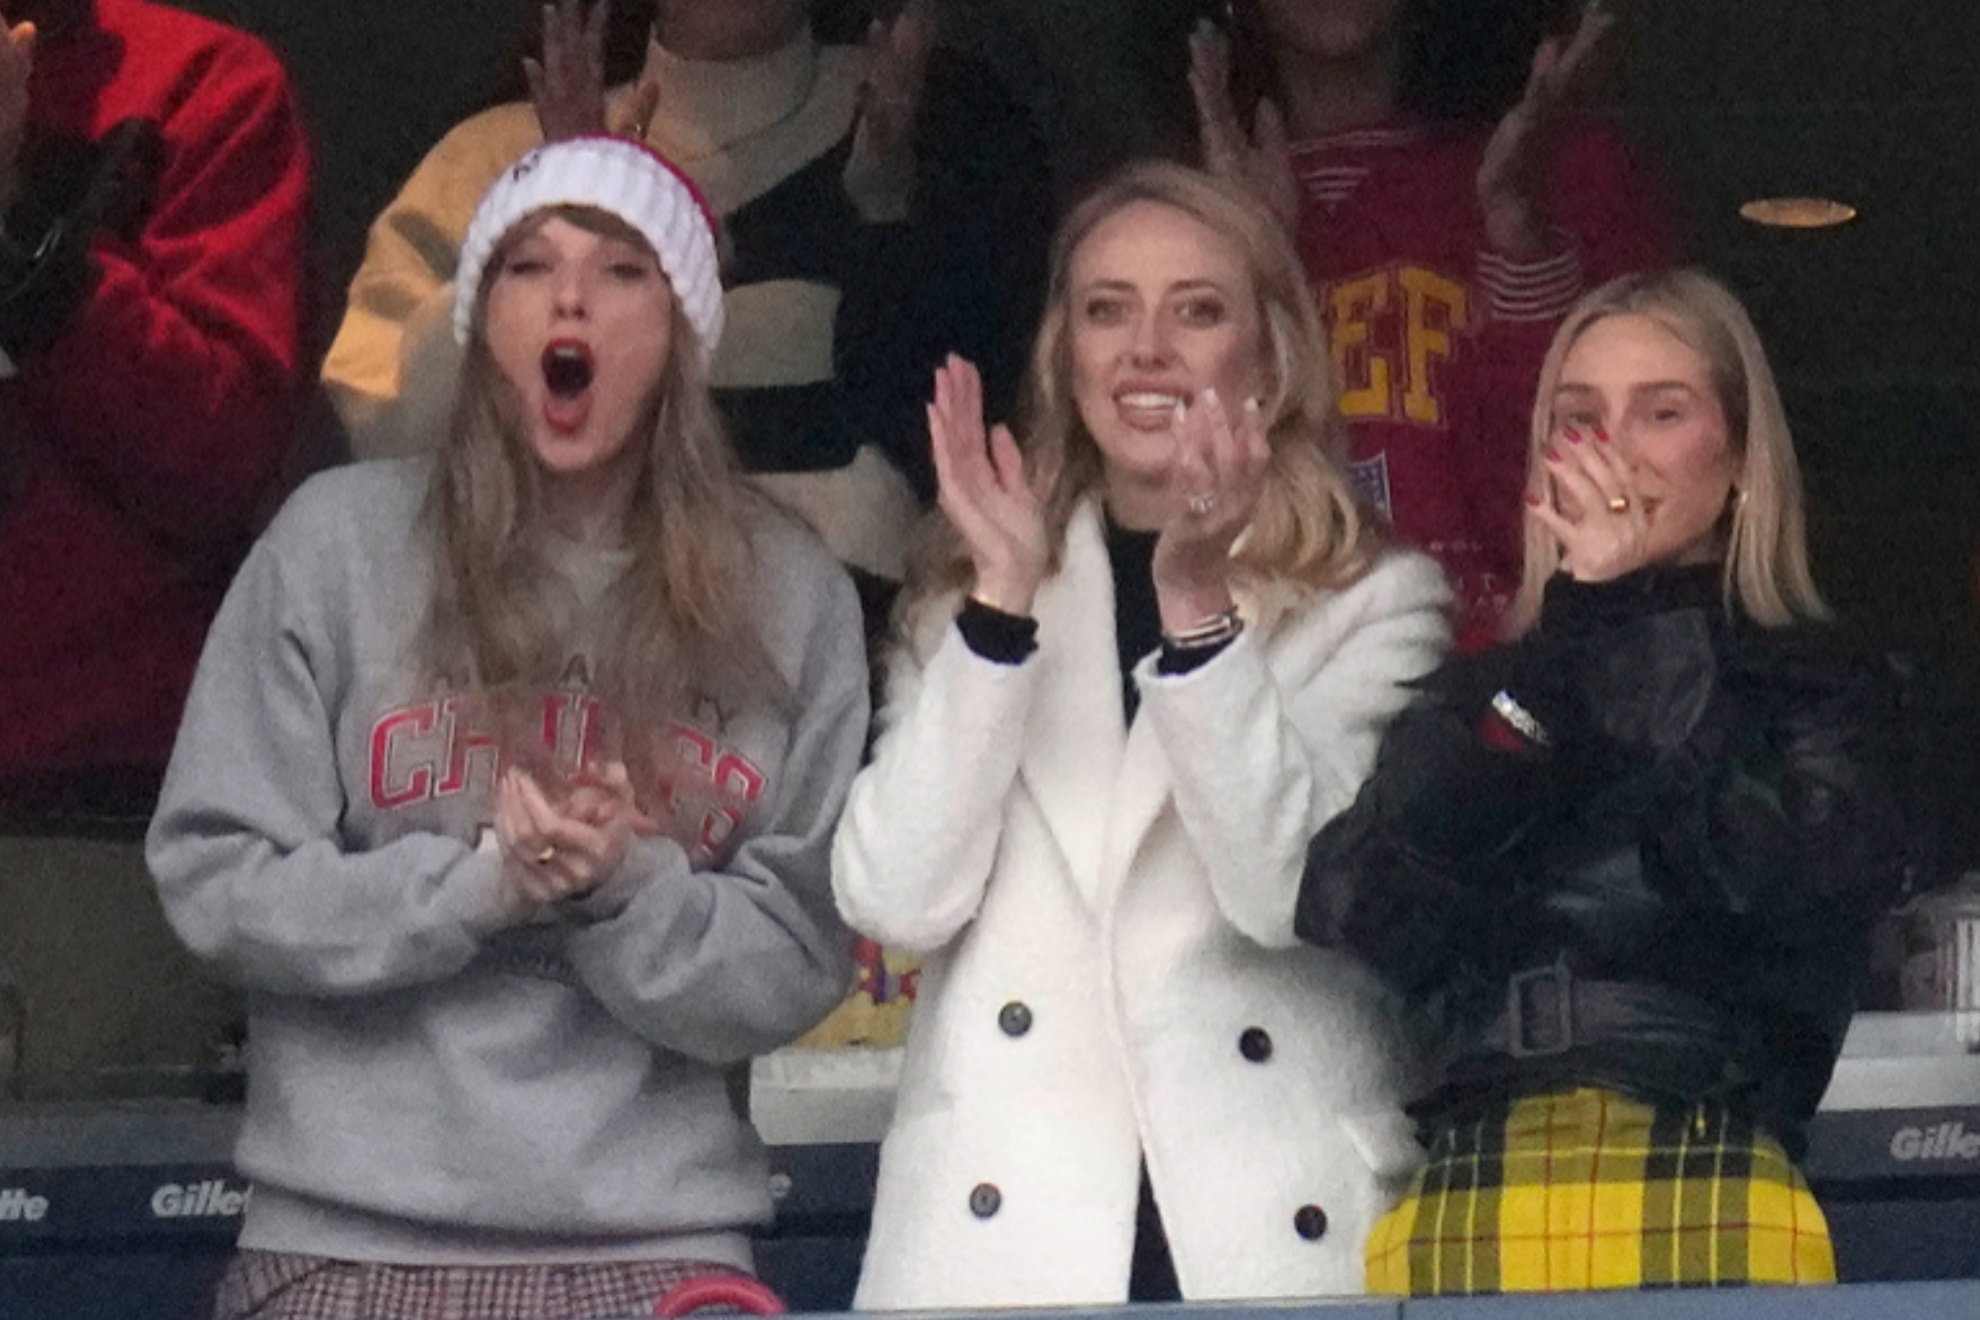 Taylor Swift is expected to attend the Raiders vs Chiefs game on Christmas Day